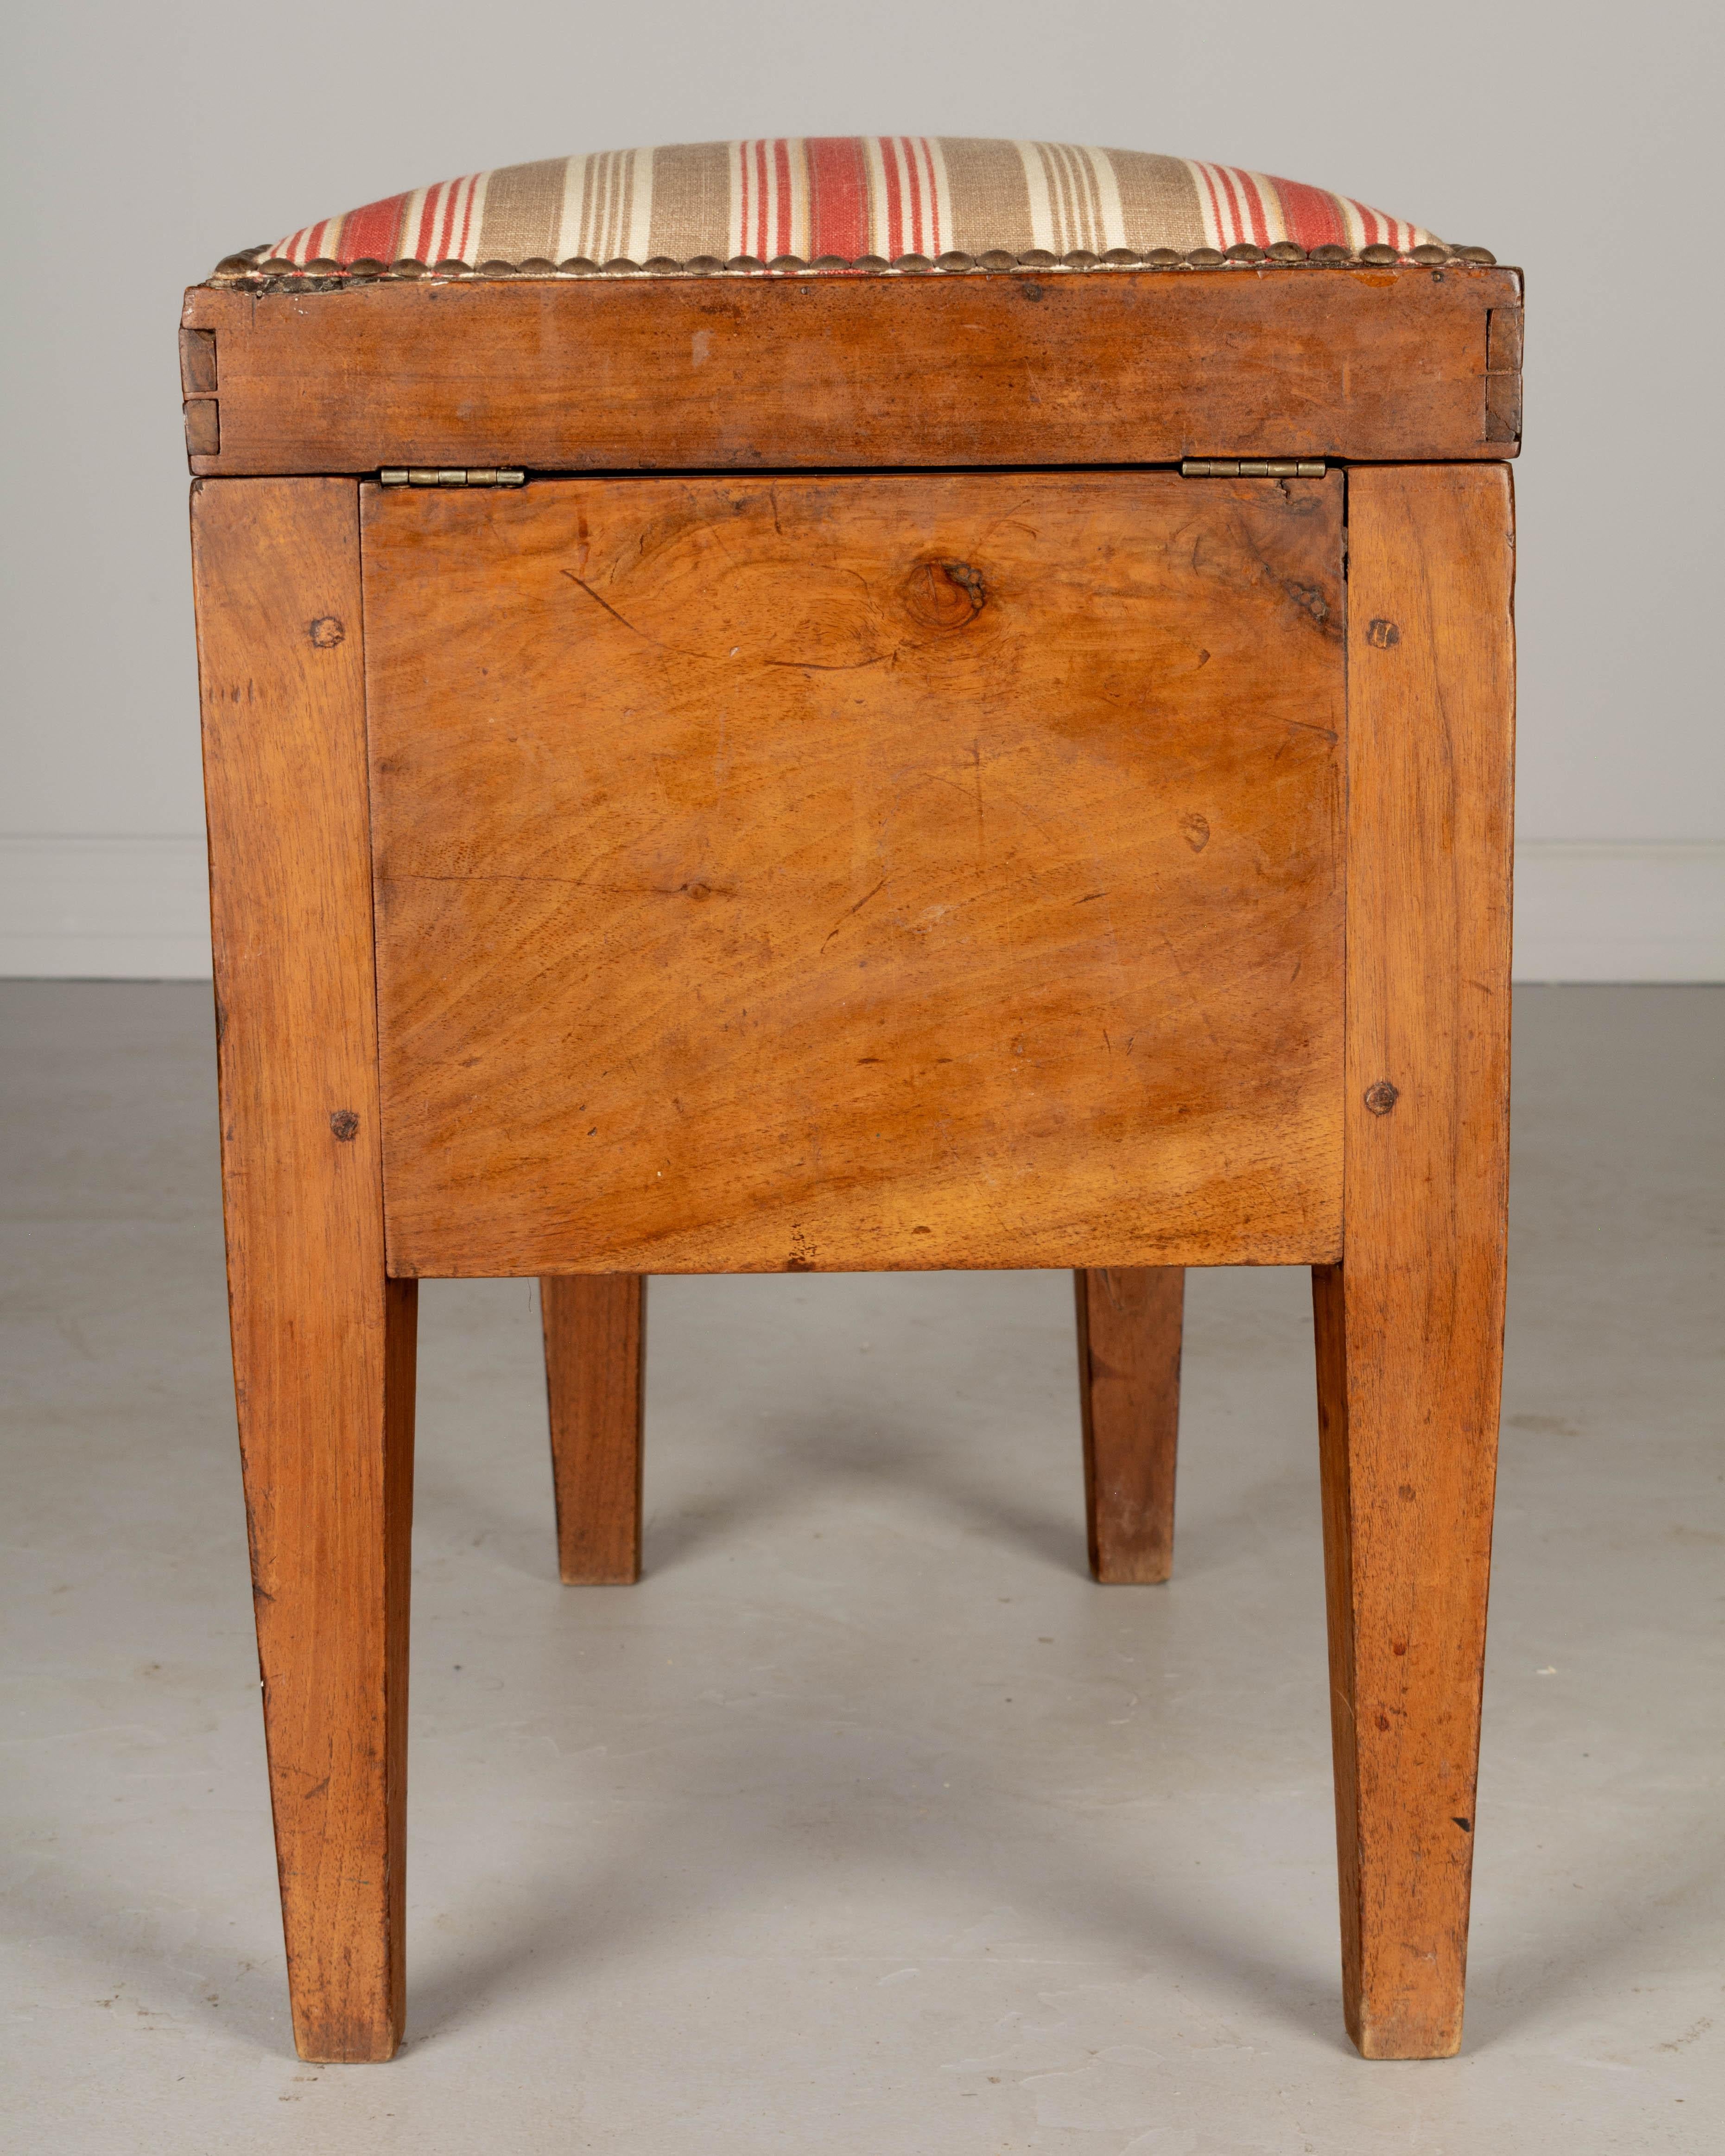 Upholstery 19th Century French Shoe Shine Stool For Sale